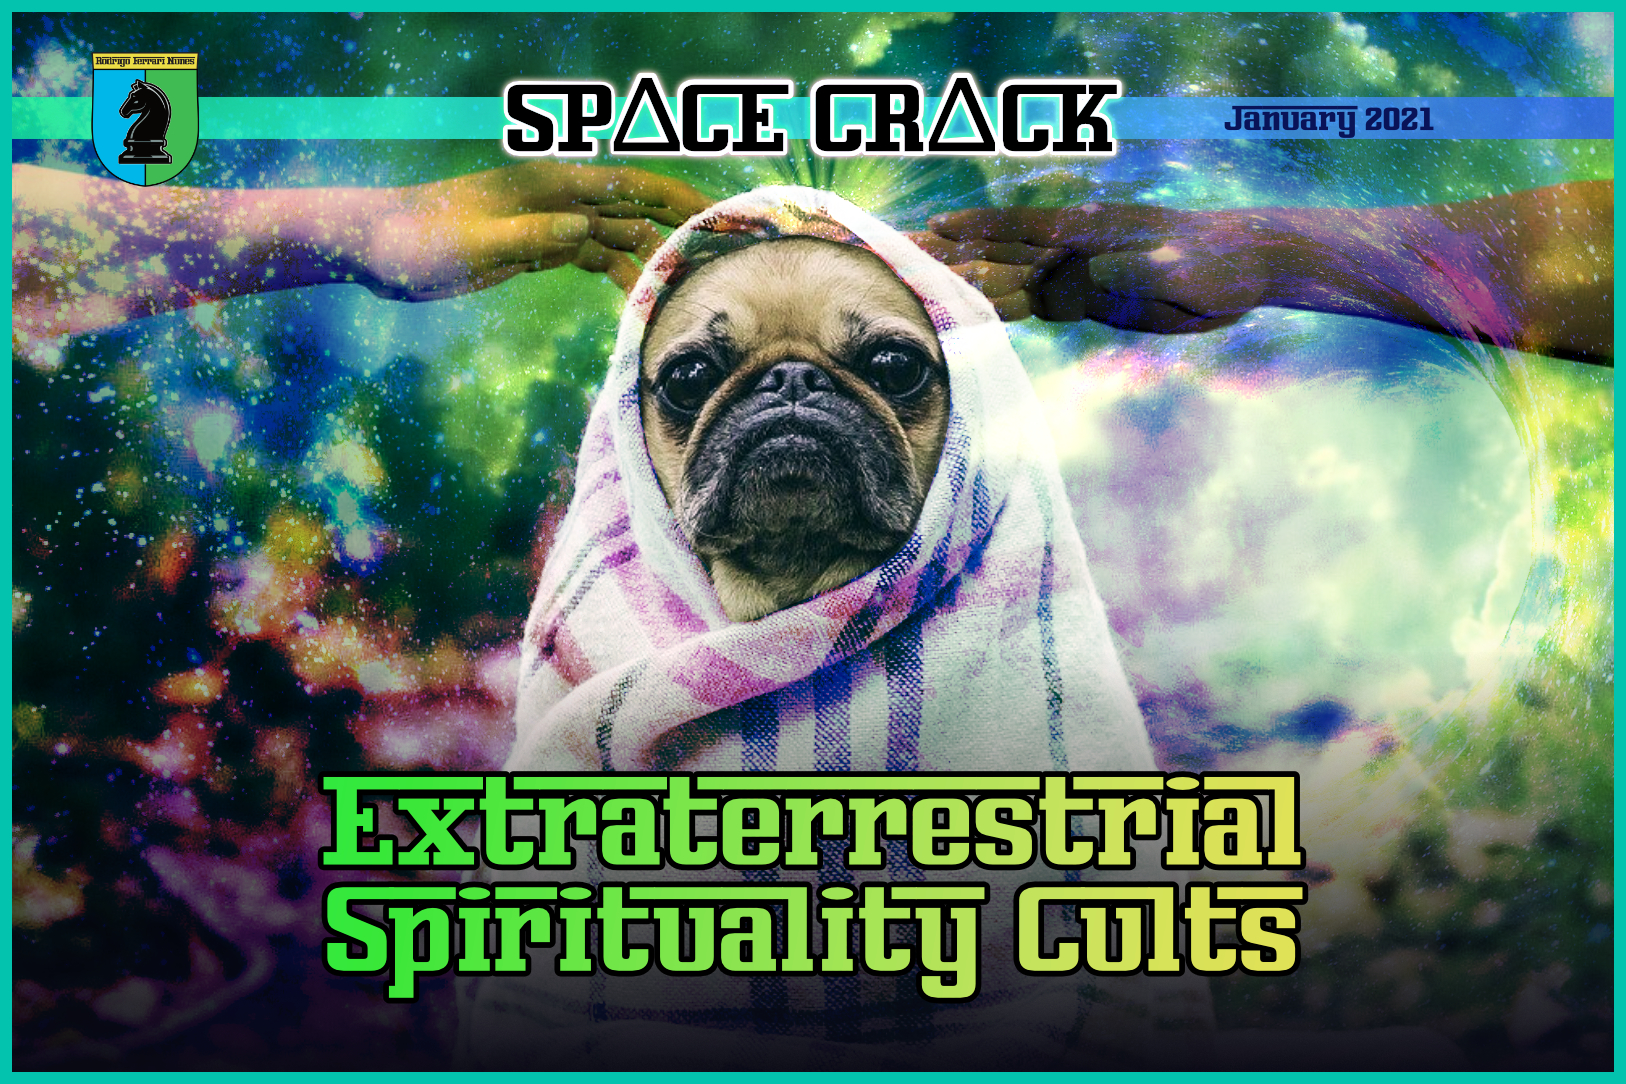 EXTRATERRESTRIAL SPIRITUALITY CULTS: MIXING RELIGION WITH SPACE CRACK LORE